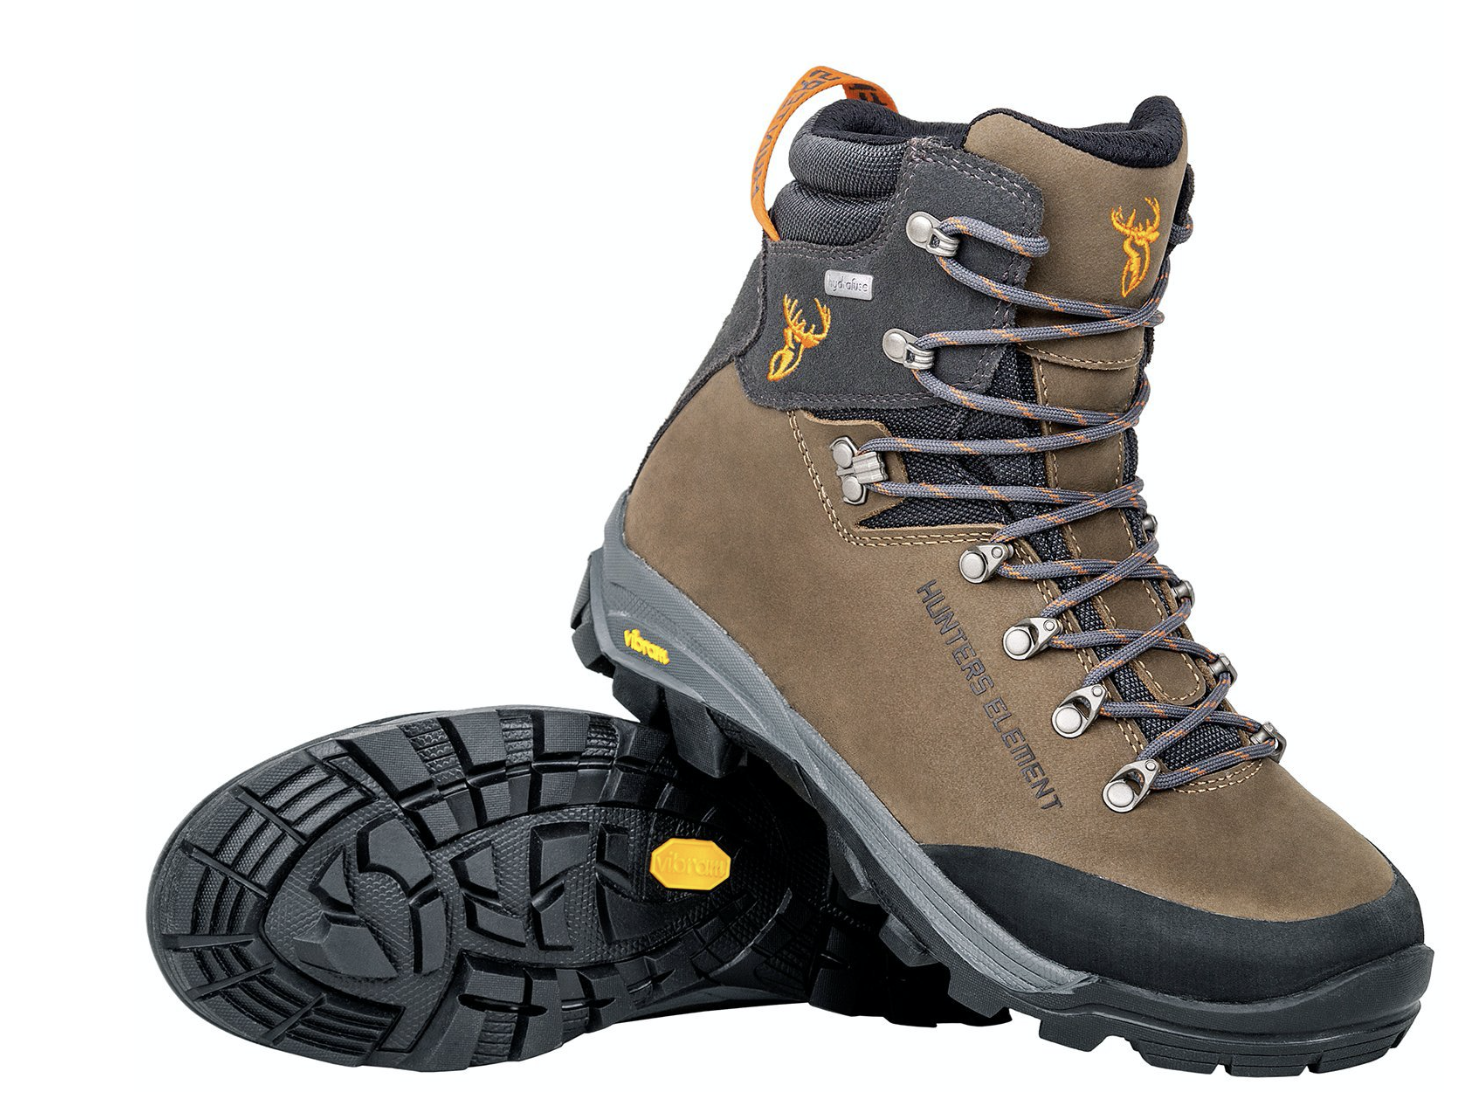 Hunters Element Lima Boot - UK7 EU41 US8 - Mansfield Hunting & Fishing - Products to prepare for Corona Virus